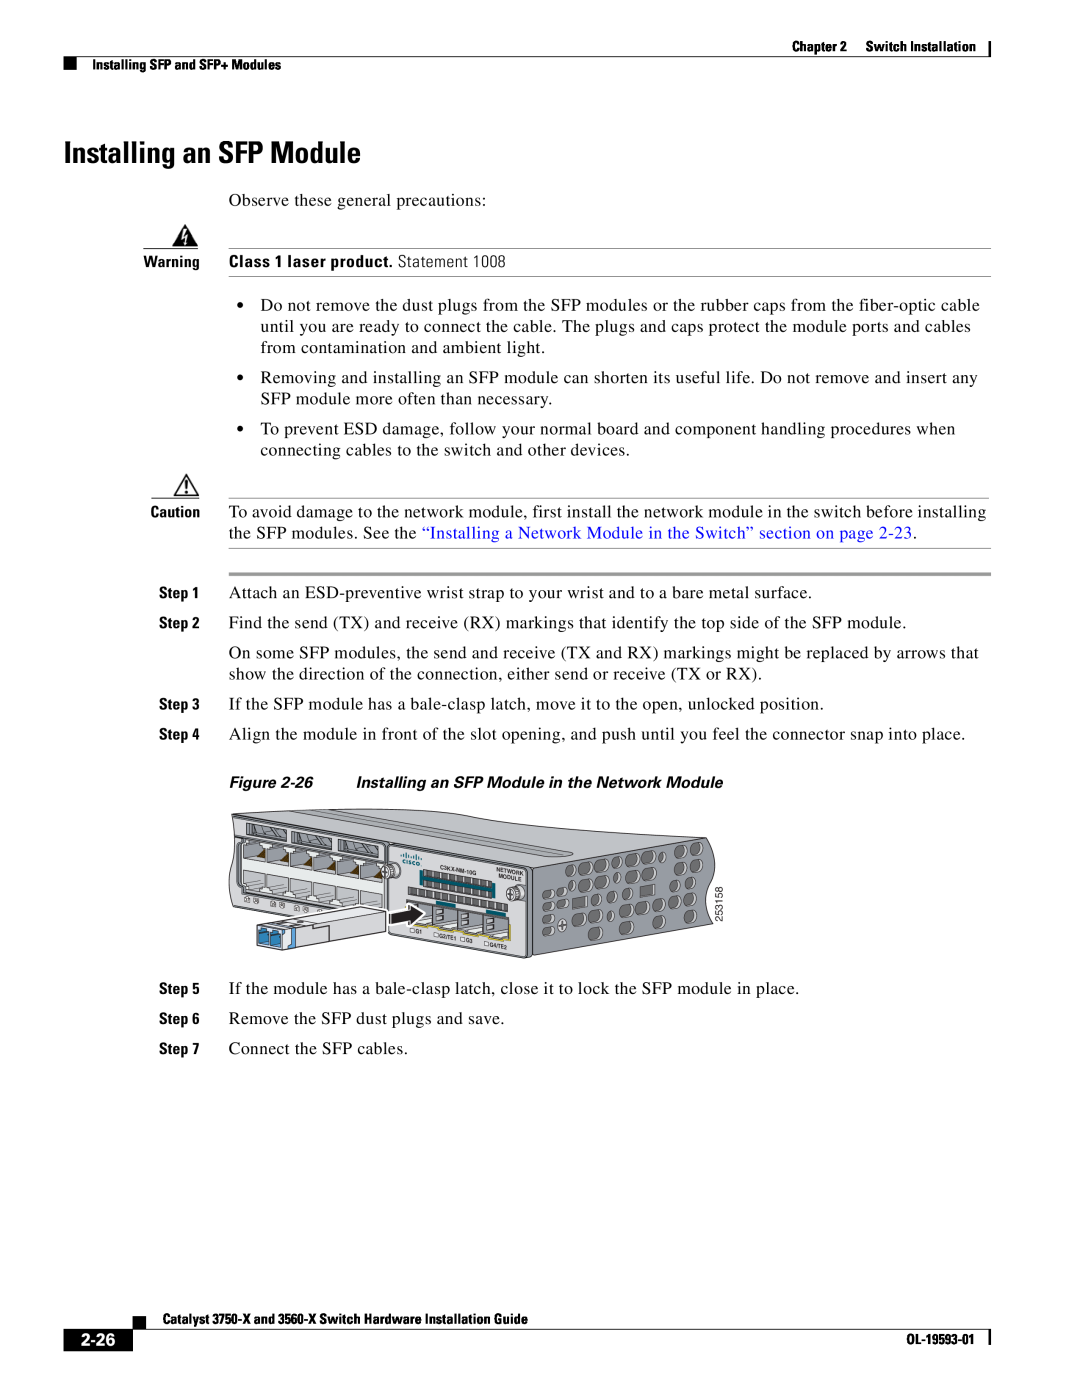 Cisco Systems 3750-X, 3560-X manual Installing an SFP Module, 2-26, Warning Class 1 laser product. Statement 